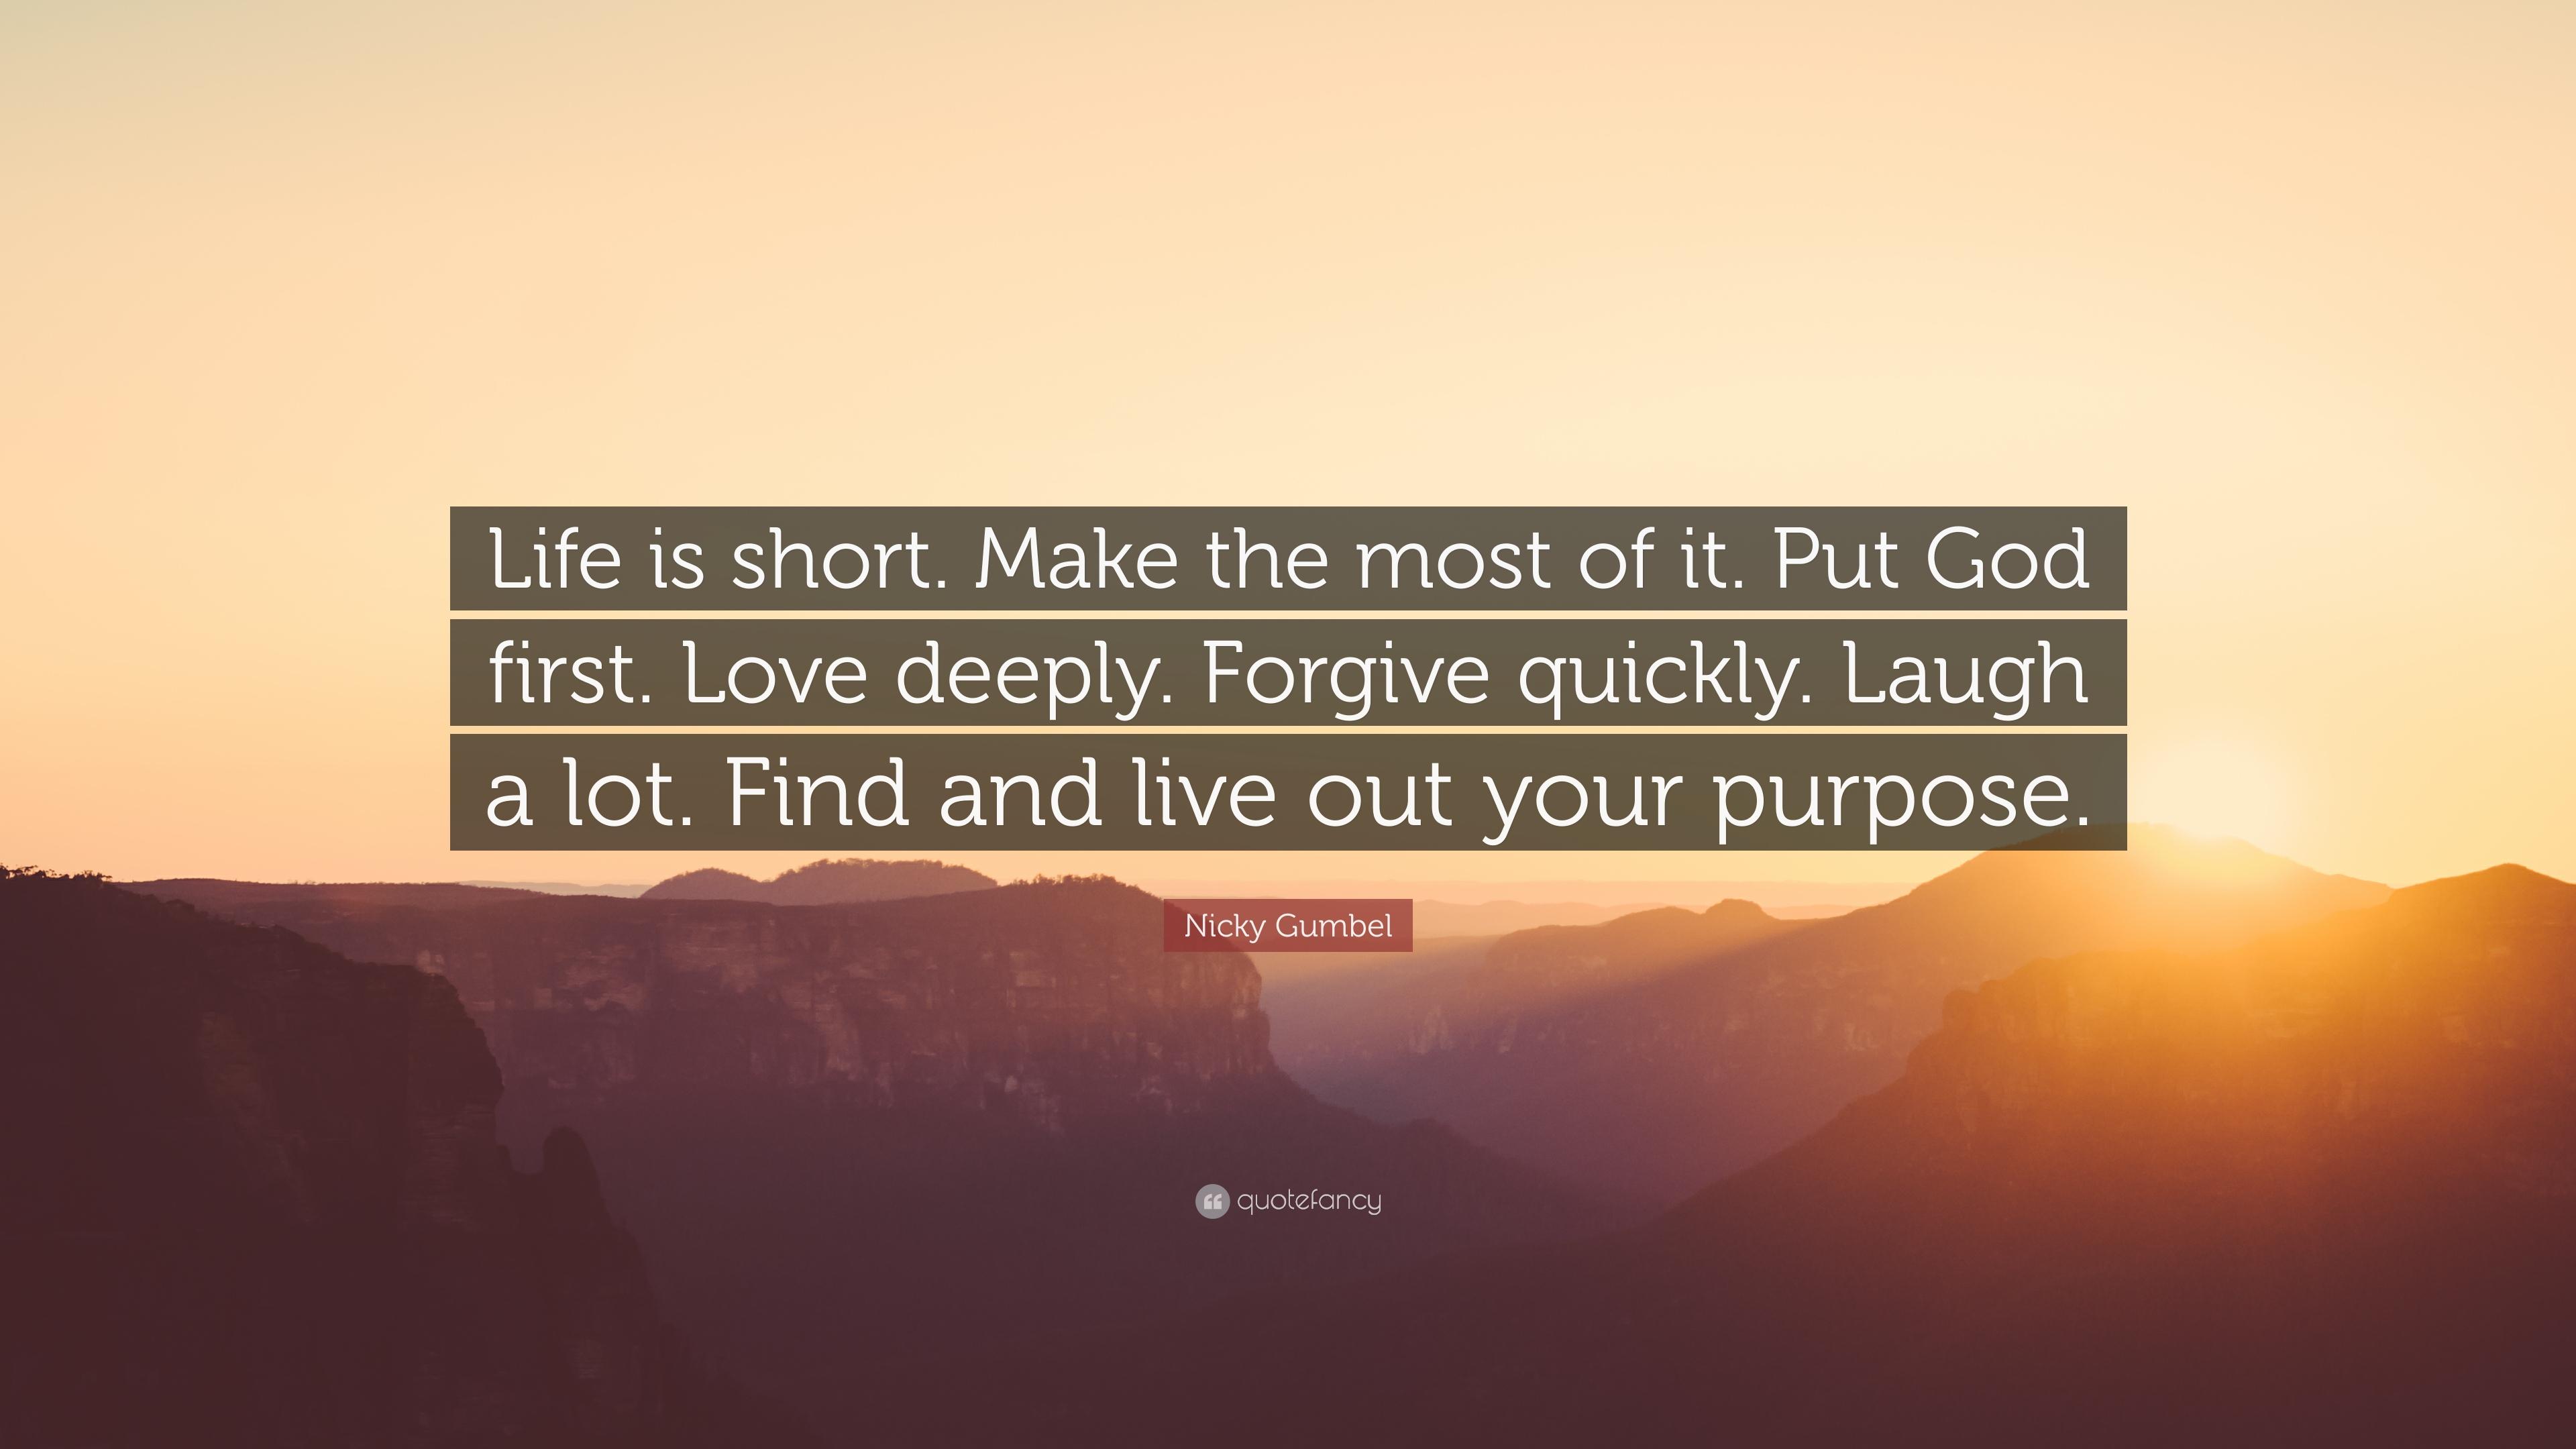 Nicky Gumbel Quote: “Life is short. Make the most of it. Put God